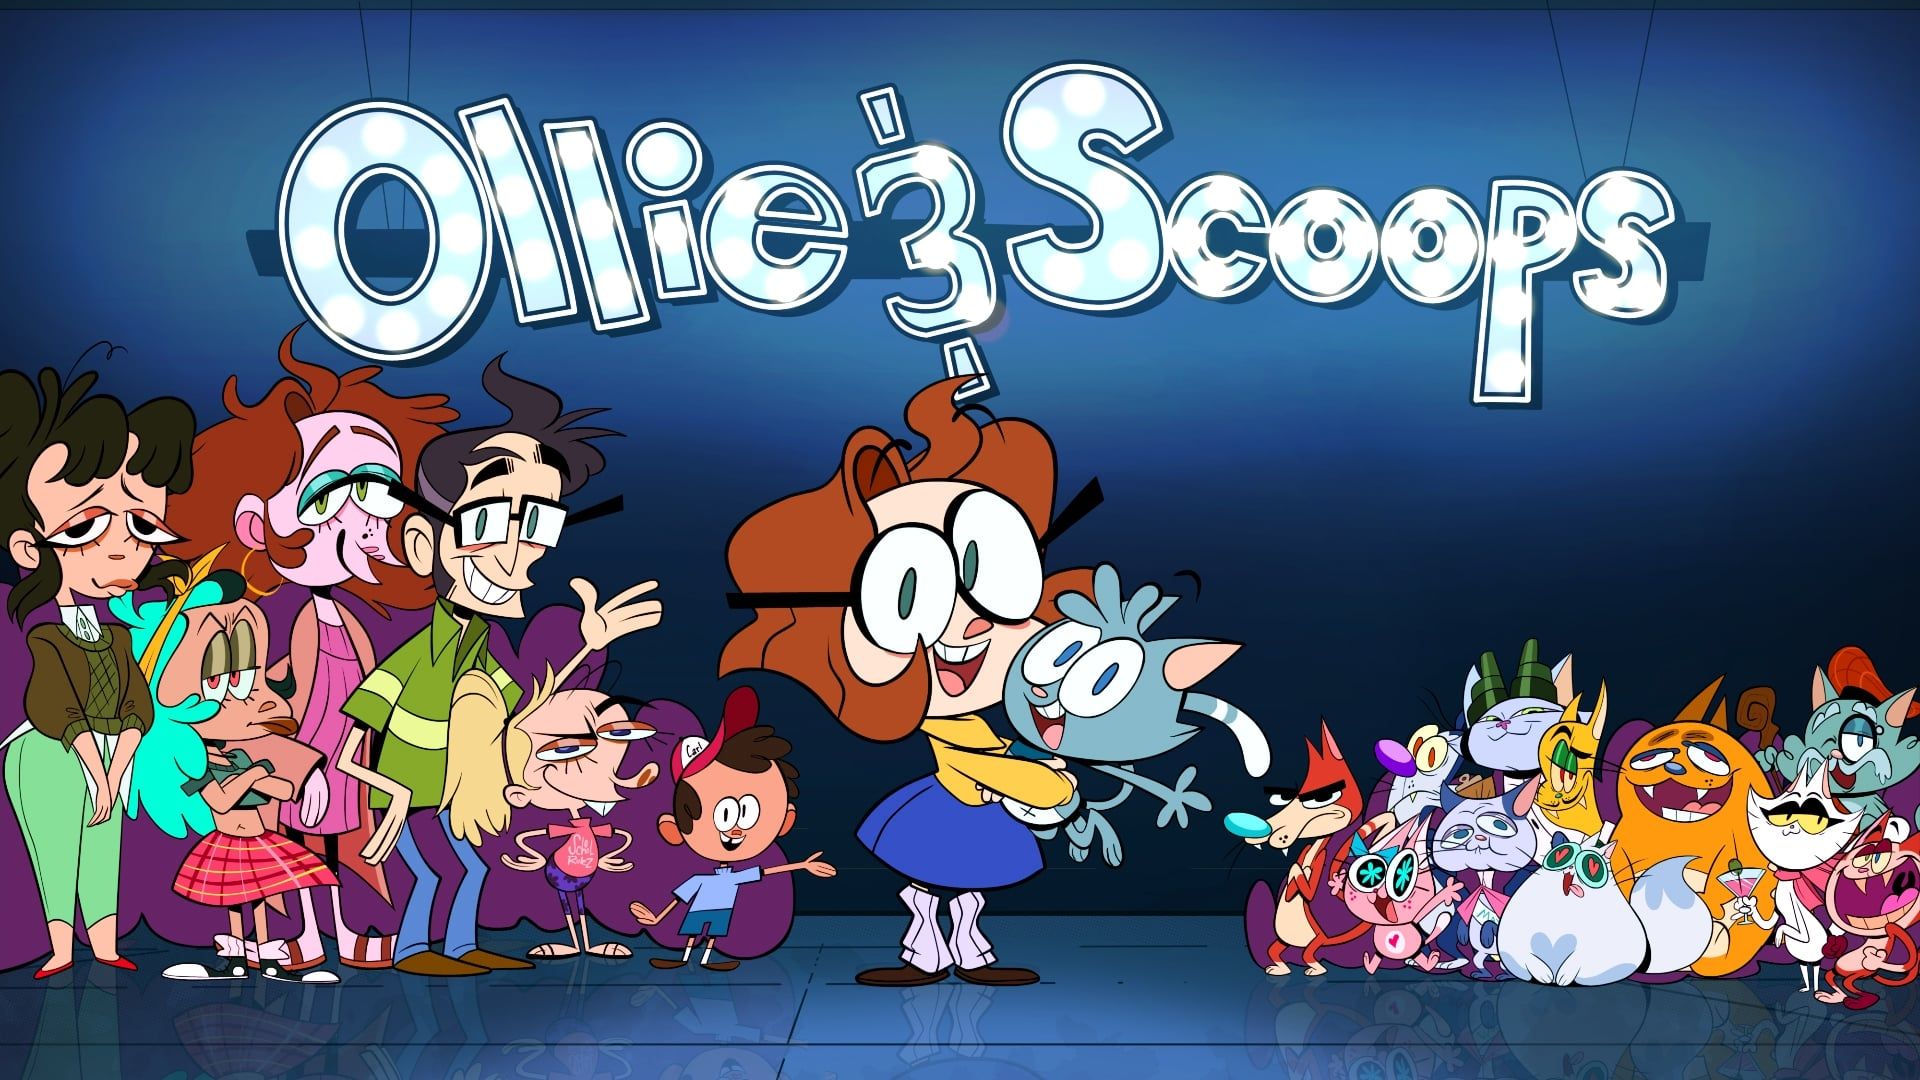 Ollie & Scoops background